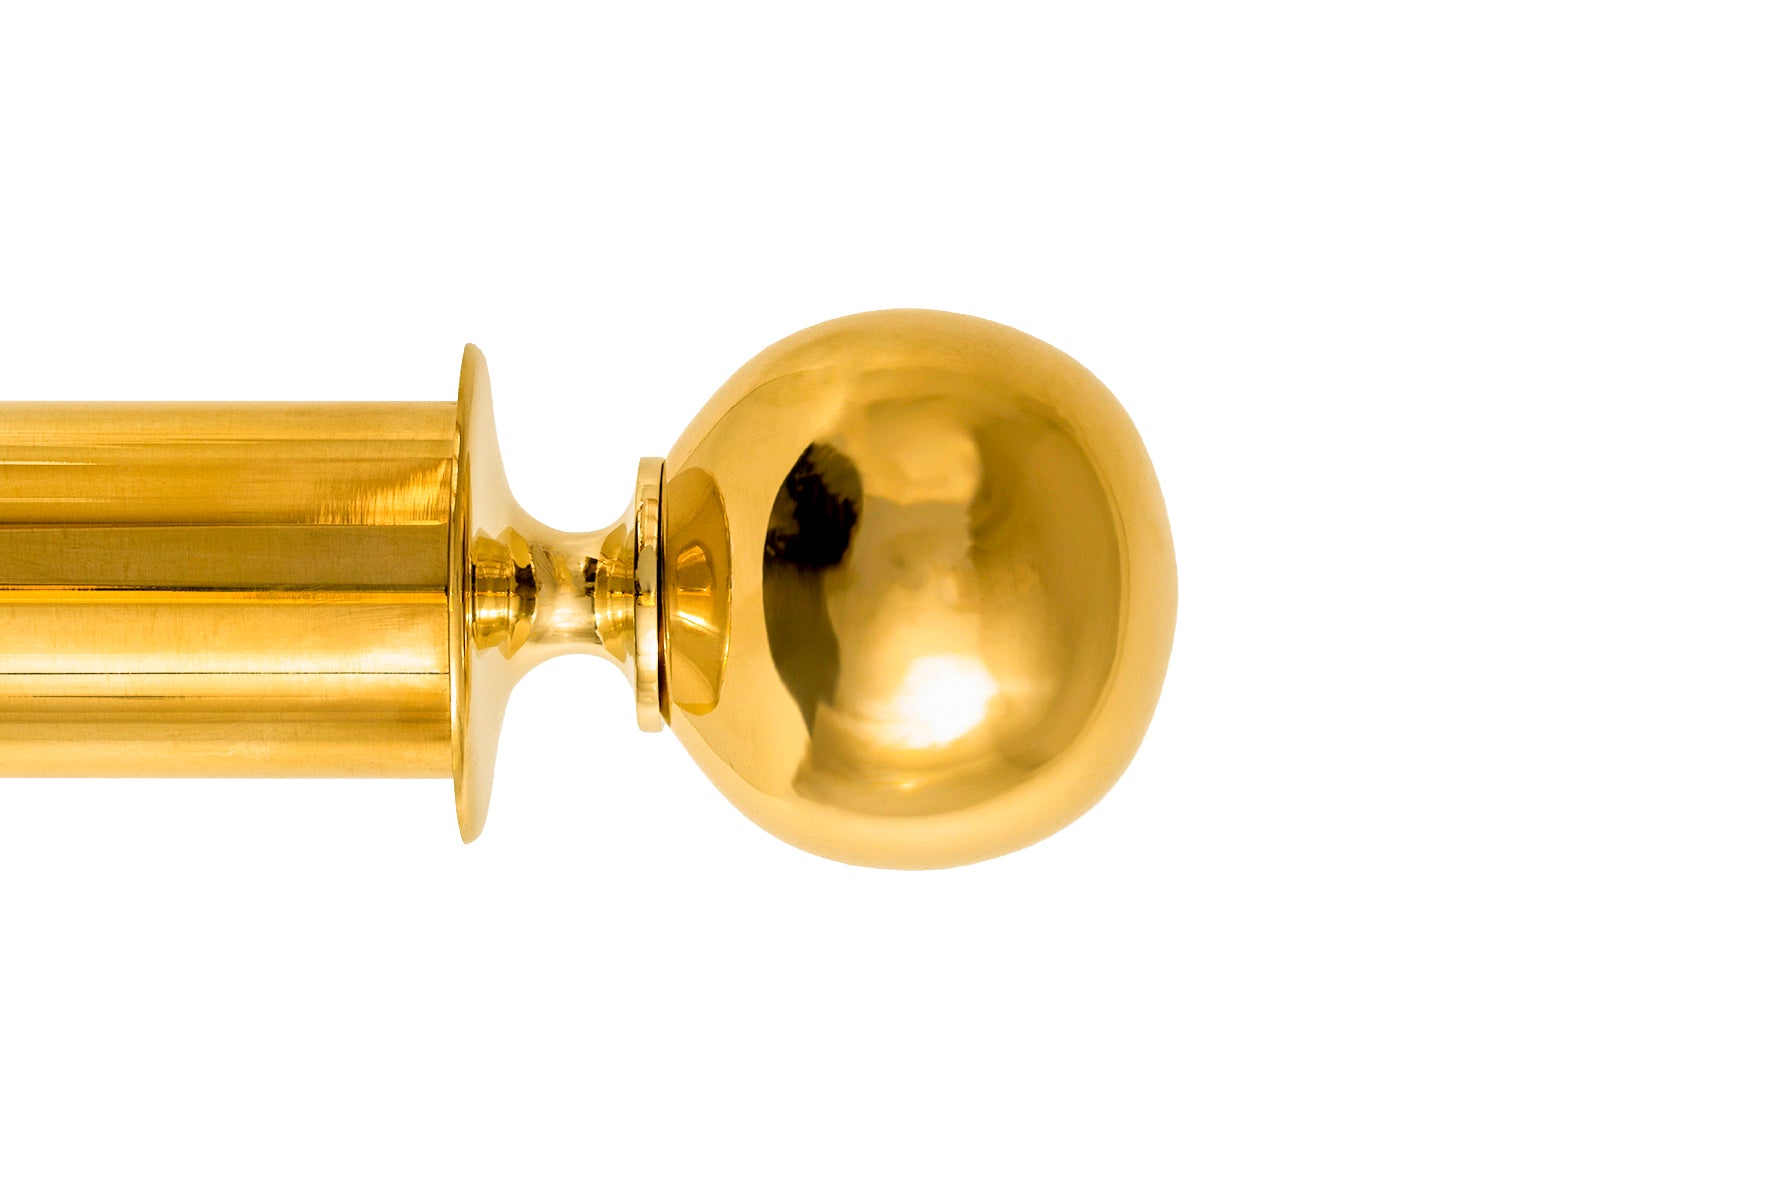 Tillys Classic Plain Ball Finial Curtain Pole Set in Polished Brass